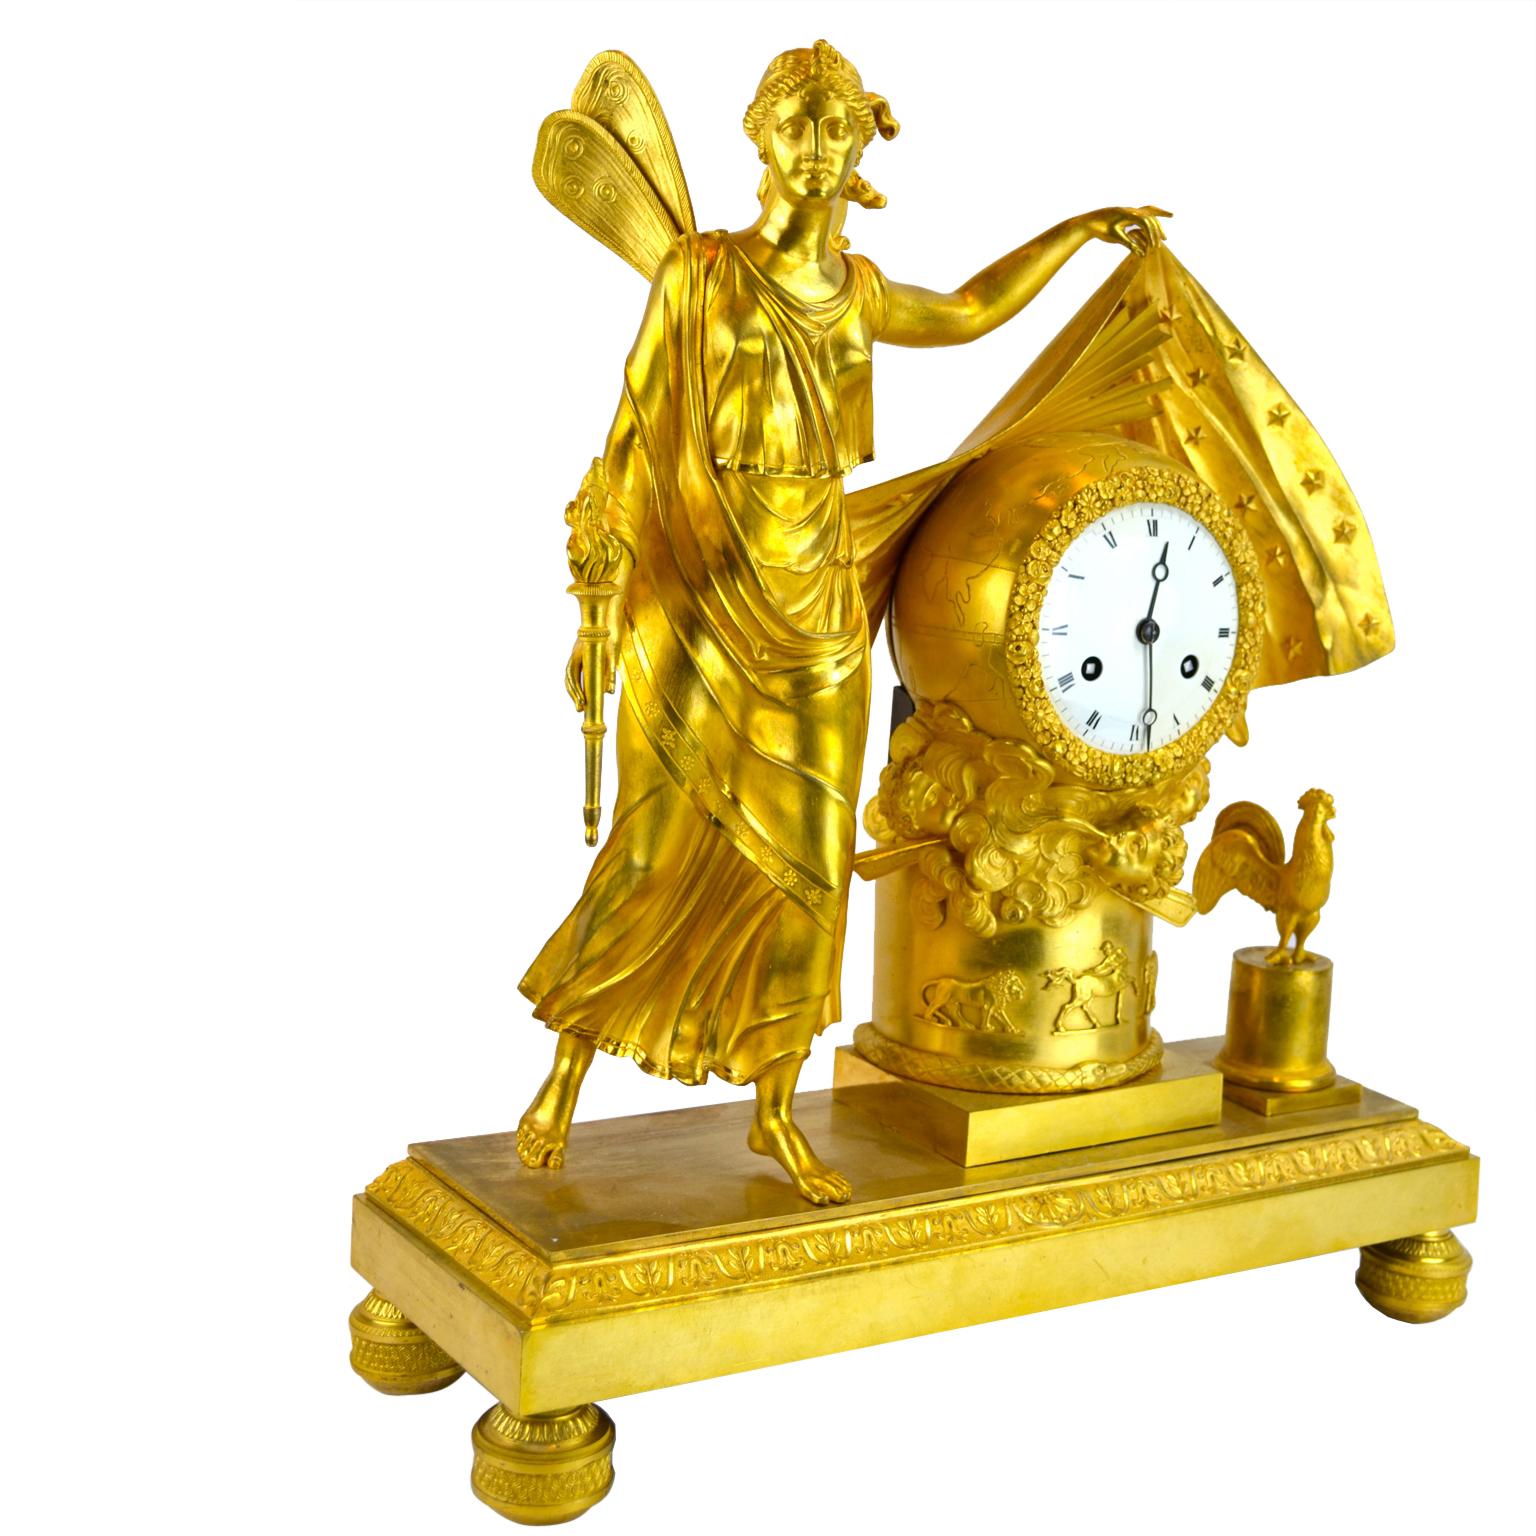 A period French Empire allegorical mantel clock with a case of finely chased and gilt bronze. Aurora stands to the left of the circular clock plinth draping a starry cloak over the globe of the world with her left hand announcing a new day. Aurora